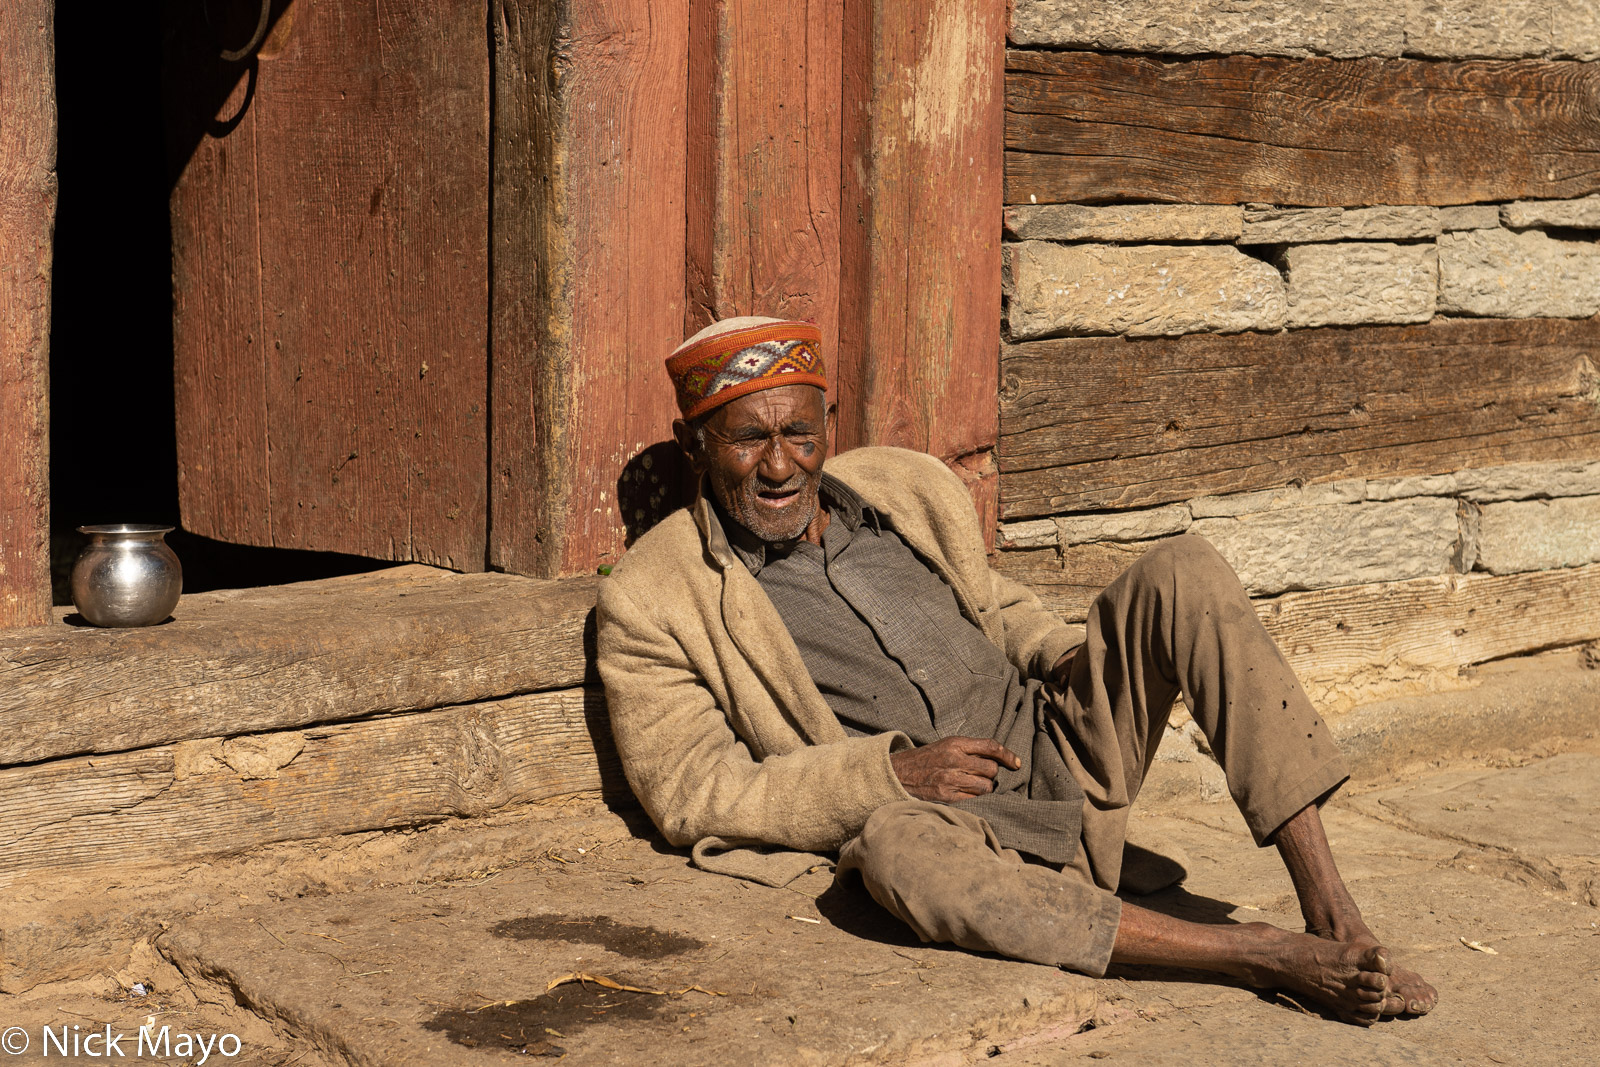 A Hallan-I man relaxing outside his traditional Kulu house built with layered wood and stone walls.